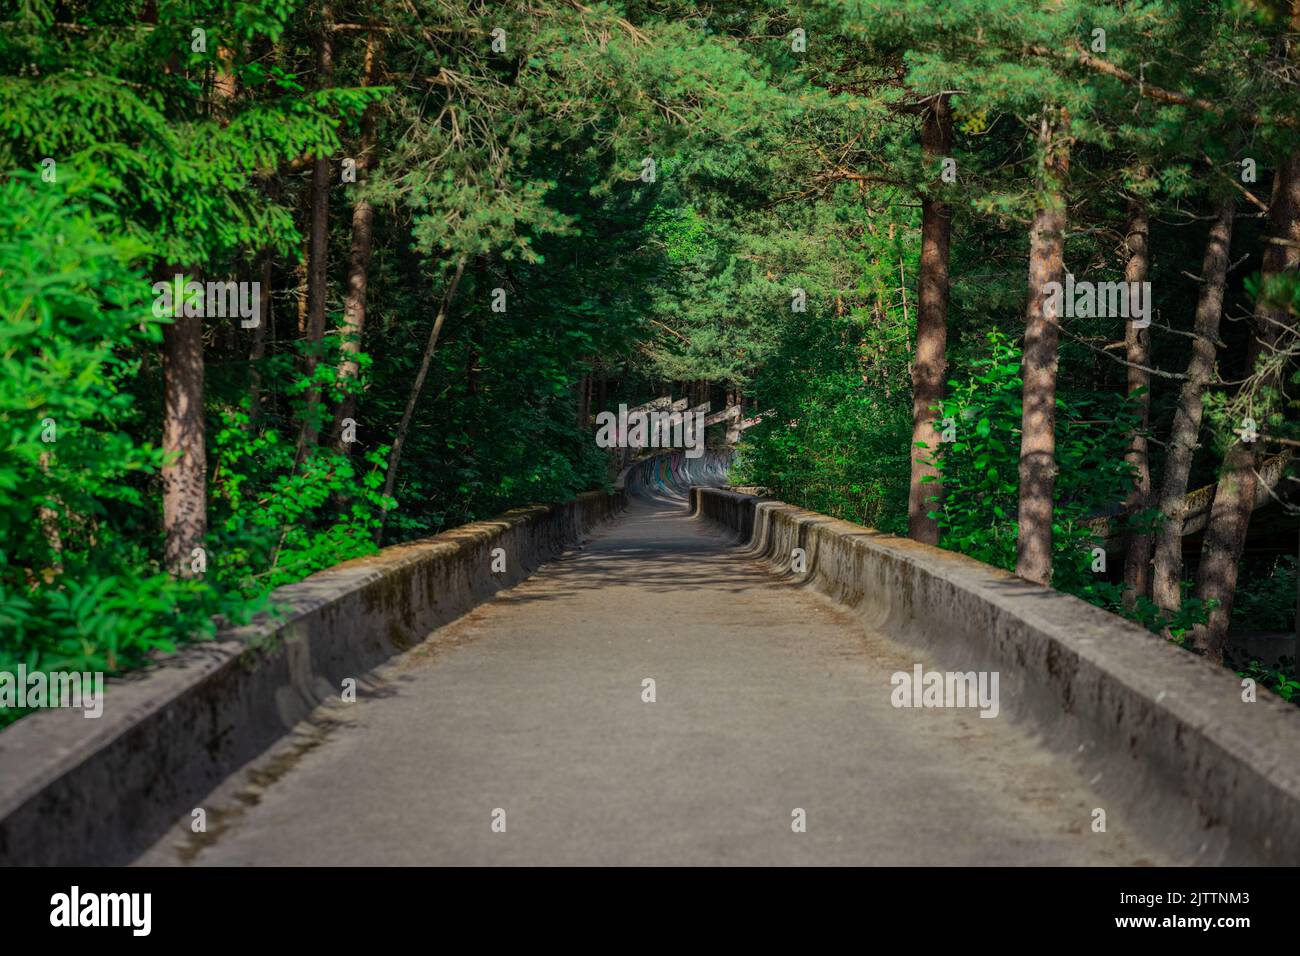 View of Abandoned or deserted remains of former bobsleigh track in Sarajevo, for the 1984 winter games. Stock Photo